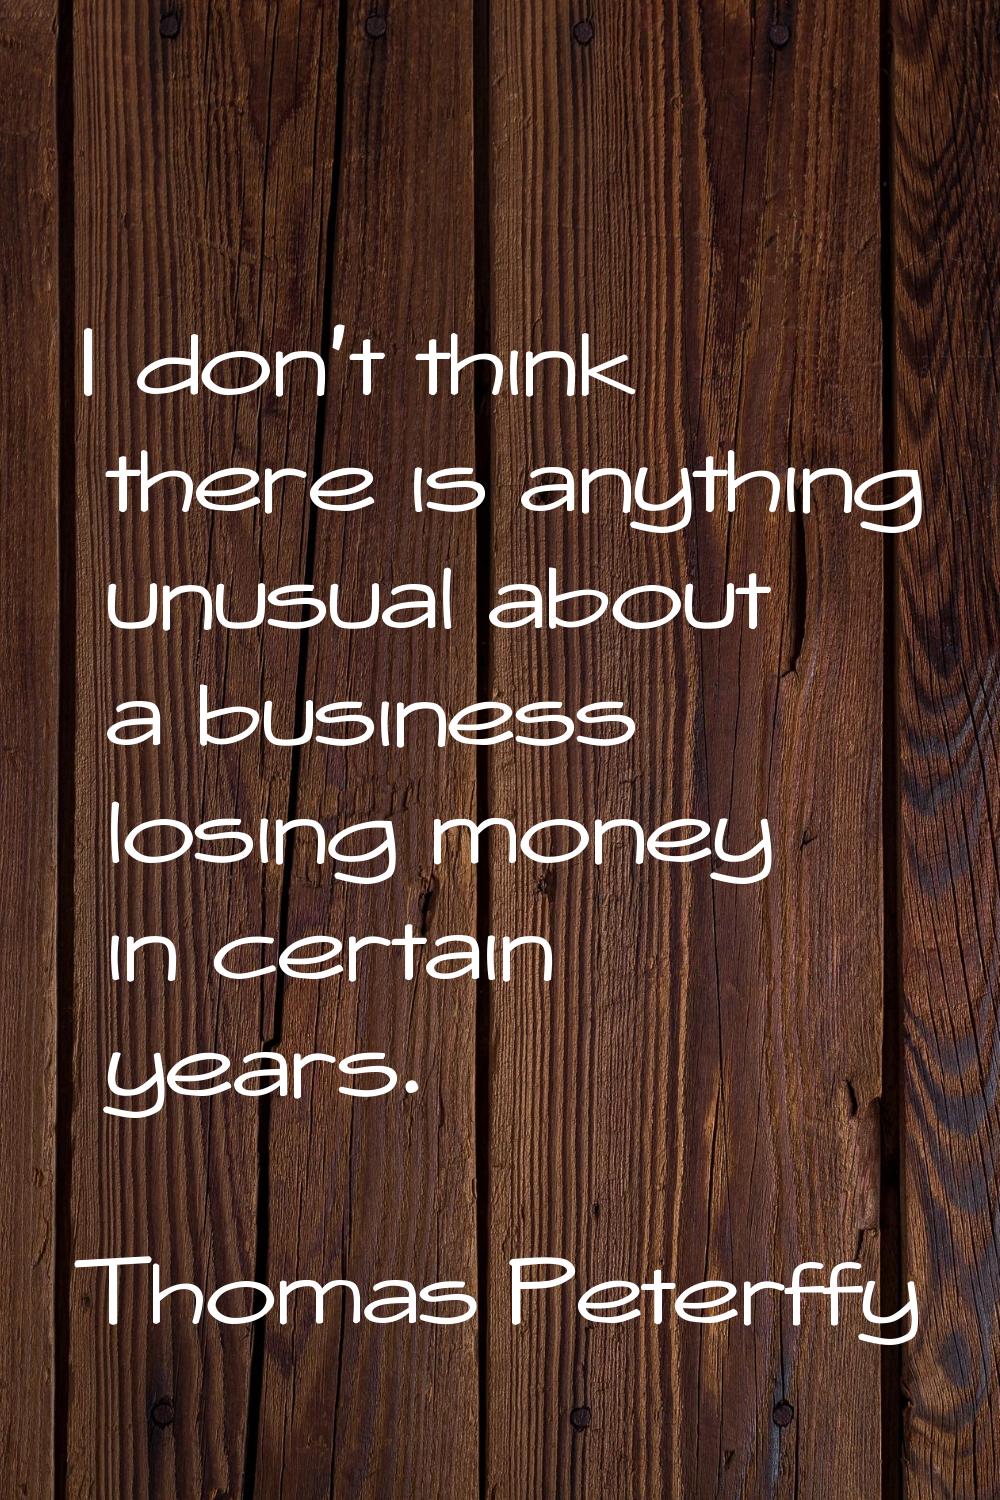 I don't think there is anything unusual about a business losing money in certain years.